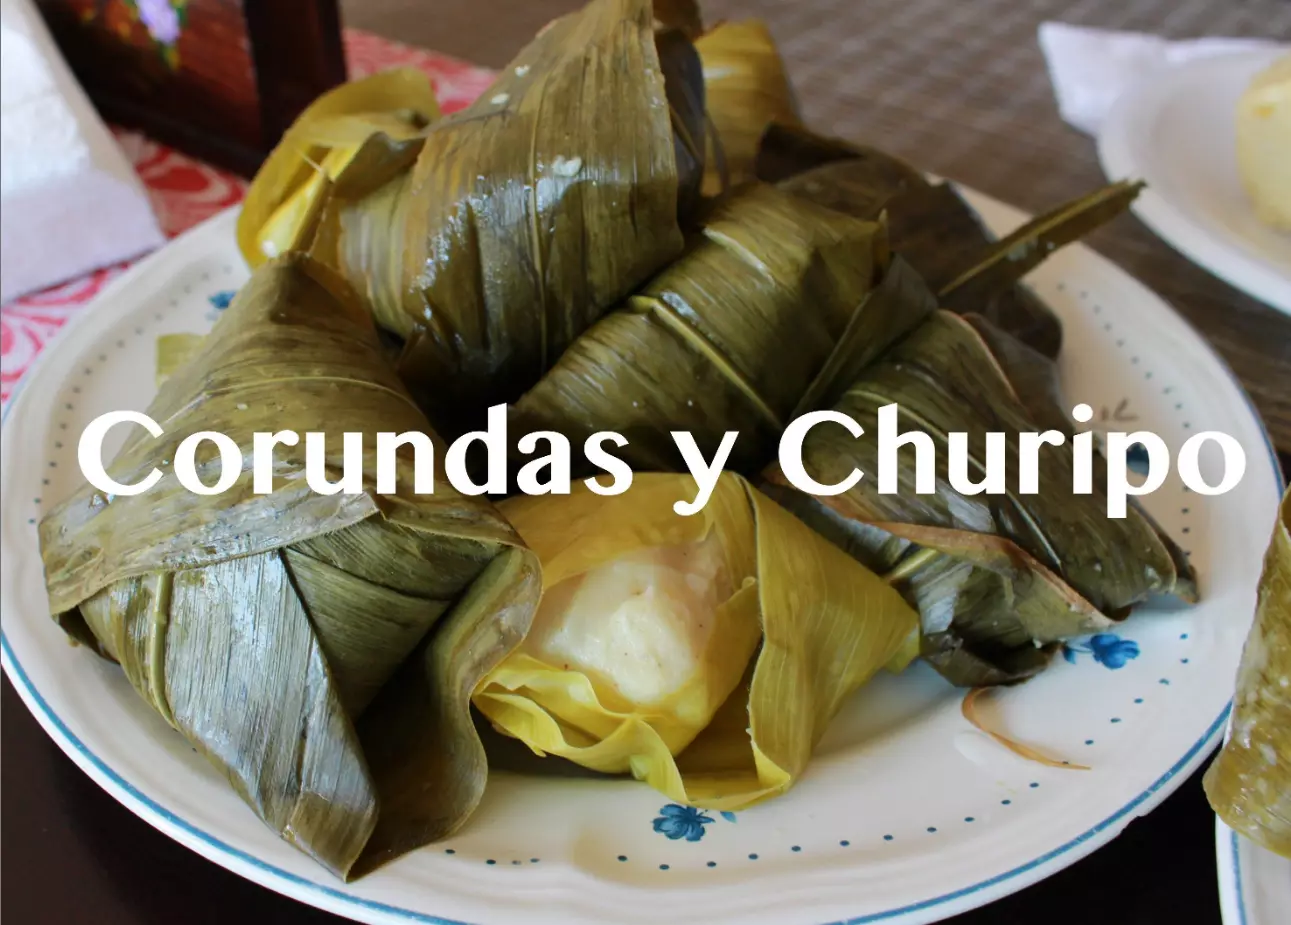 A plate of two corn husk-wrapped tamales with a small bowl of corundas